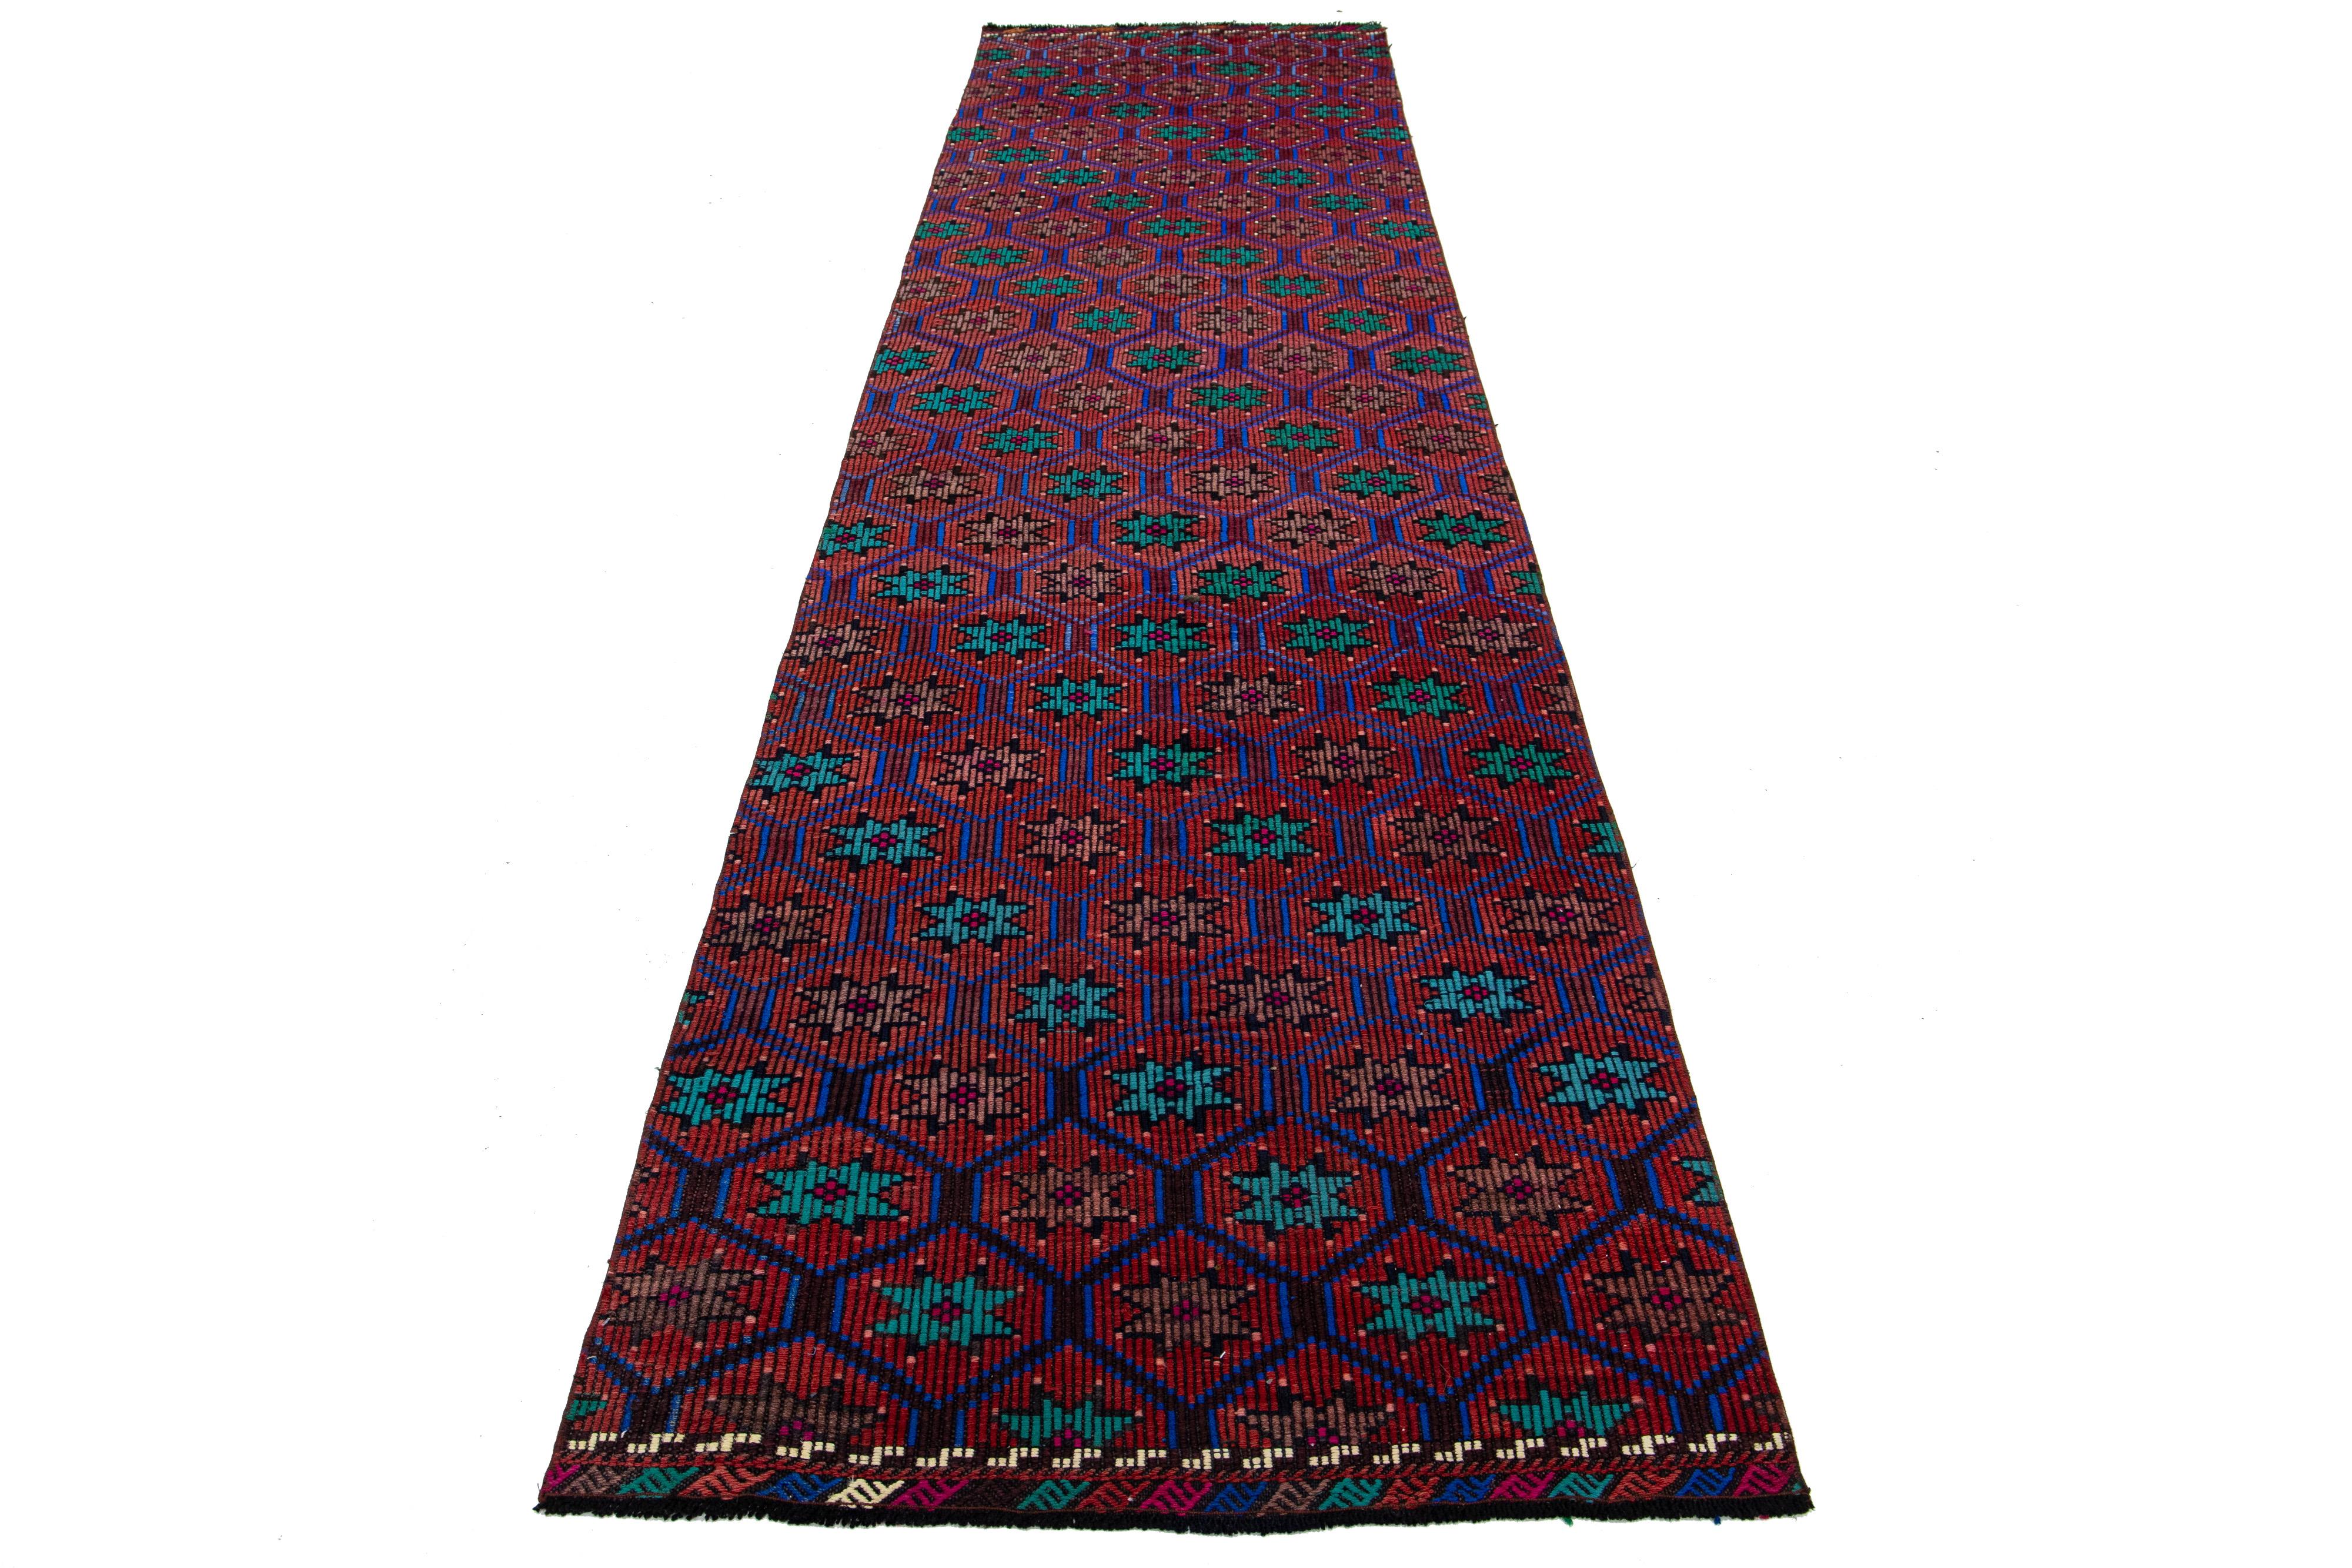 This beautiful wool kilim rug showcases a striking all-over geometric design with vibrant multi-colored accents set against a deep rust background.

This rug measures 3'2